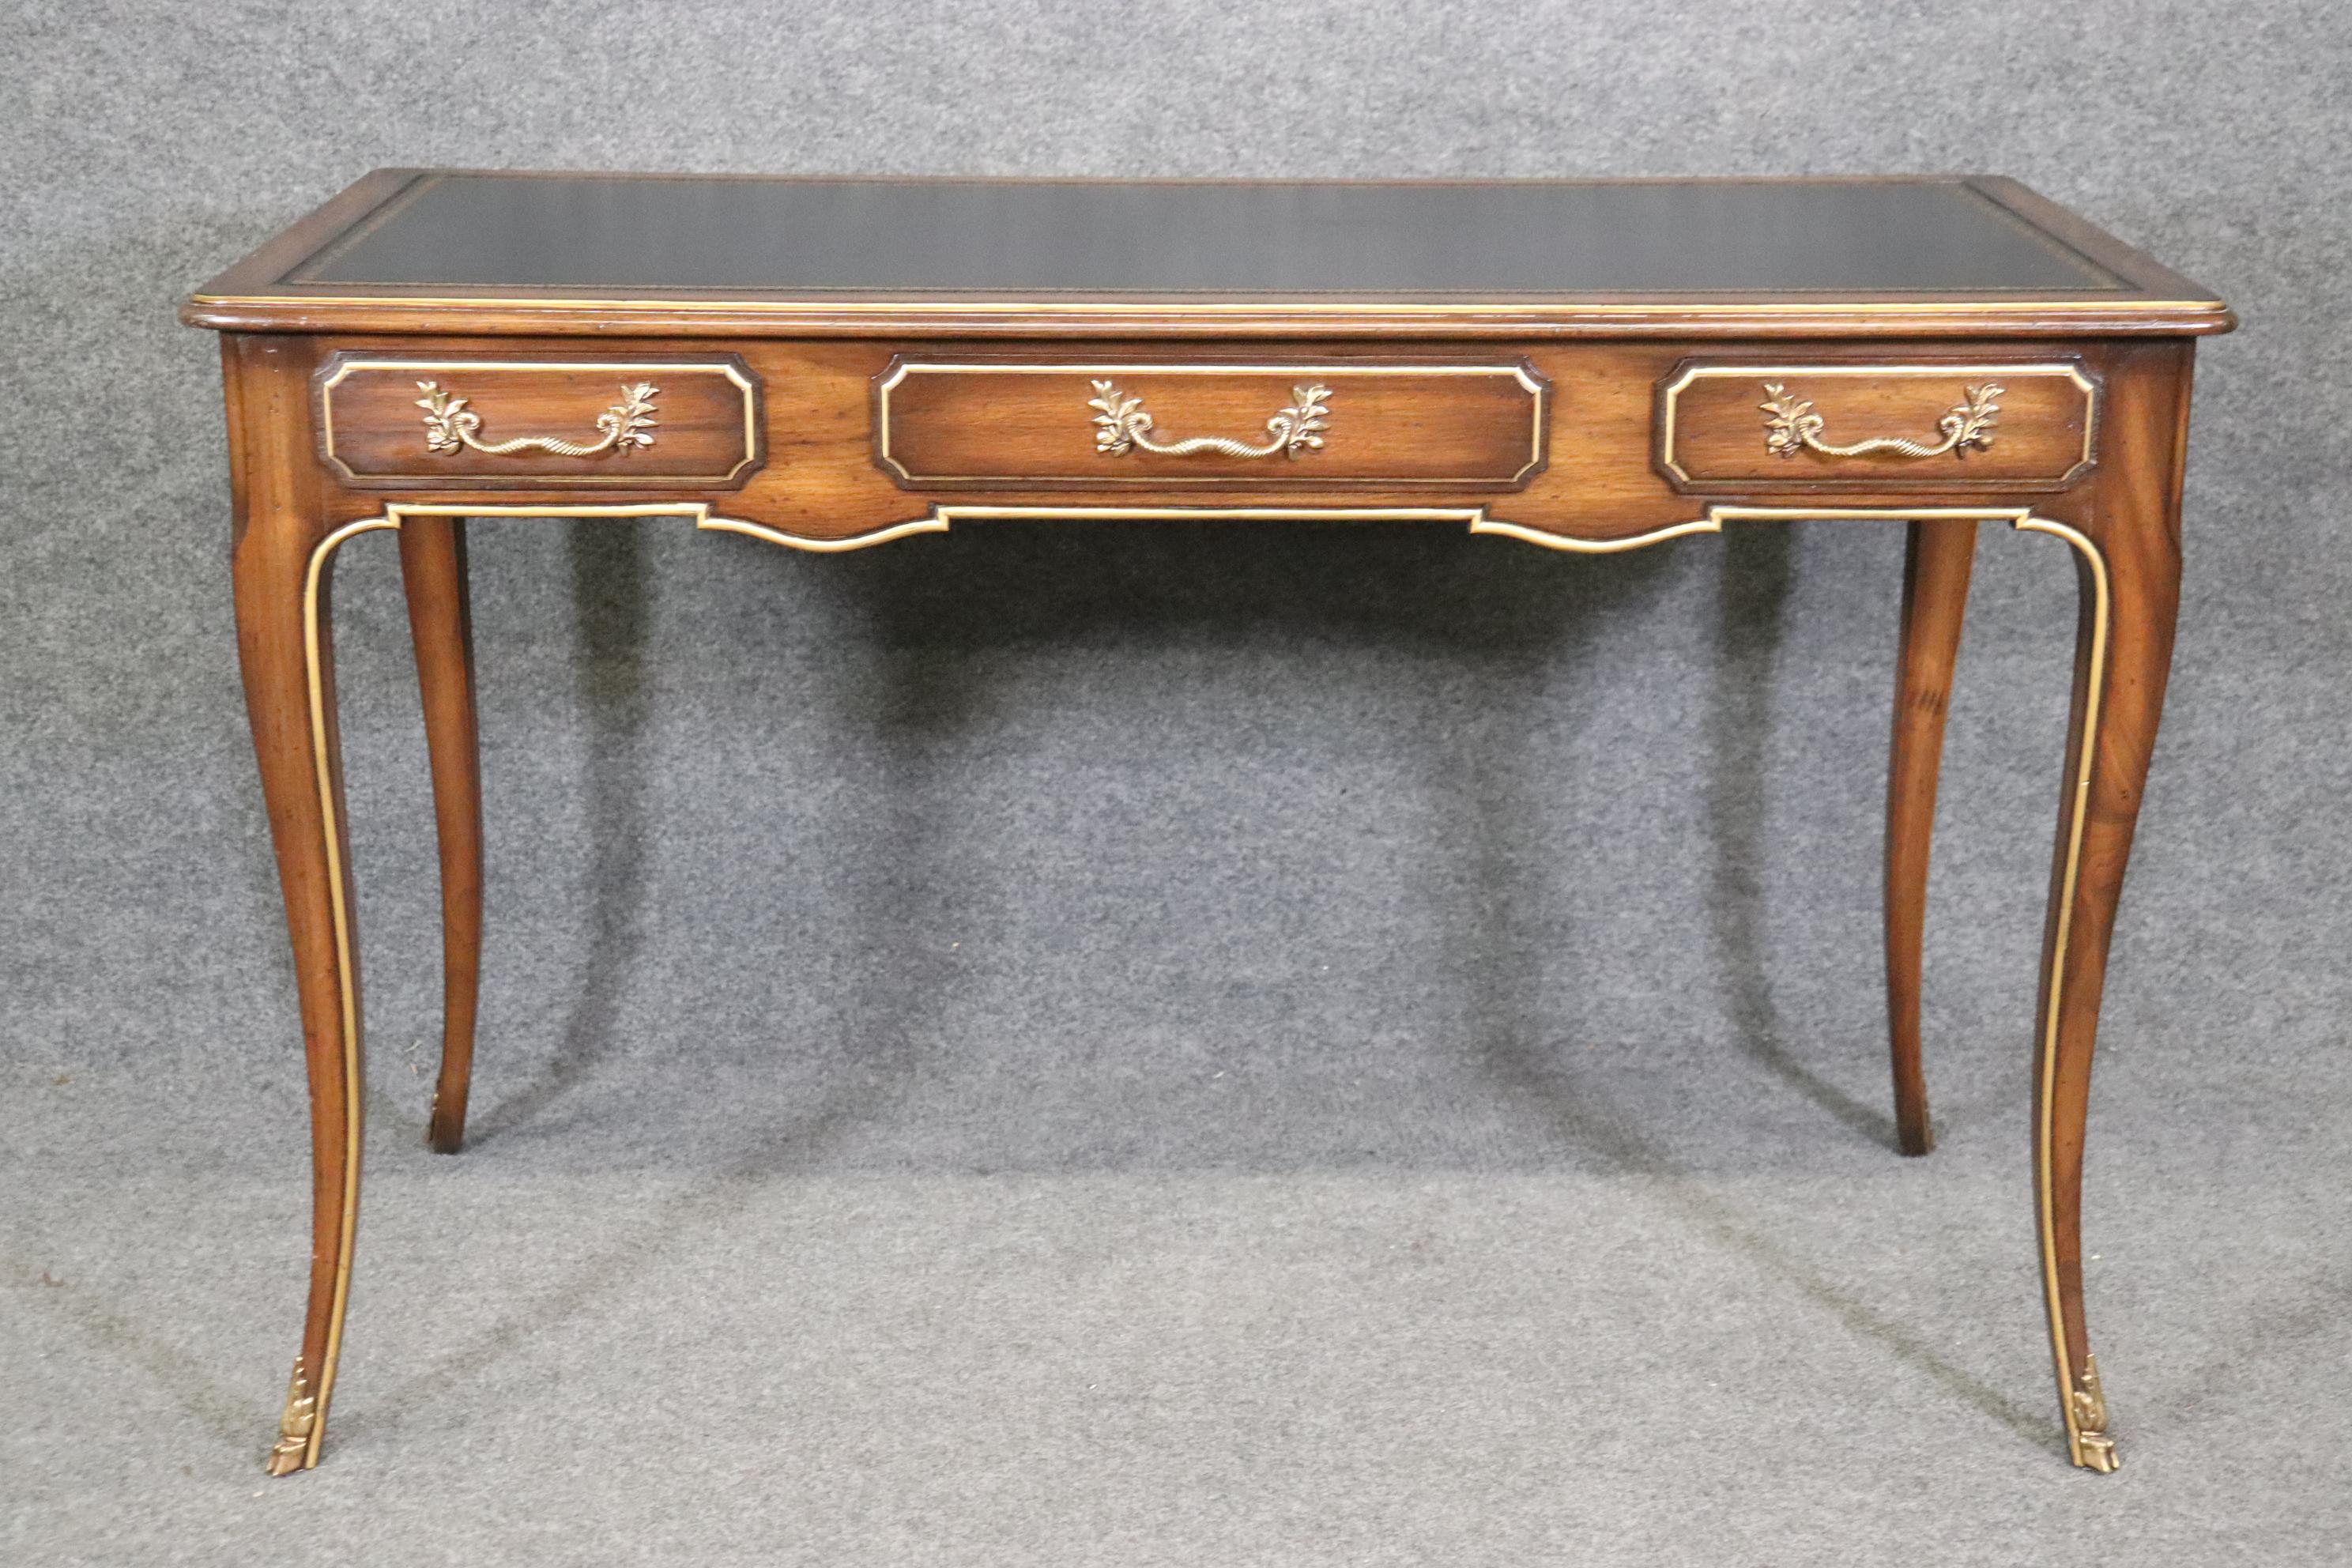 Dimensions- H: 30in W: 49in D: 24 1/2in 
This French Louis XV Style Leather Top Desk In The Manner of Baker is a lovely piece of furniture that is a great example of quality furniture in the late 20th Century. If you look at the photos provided you